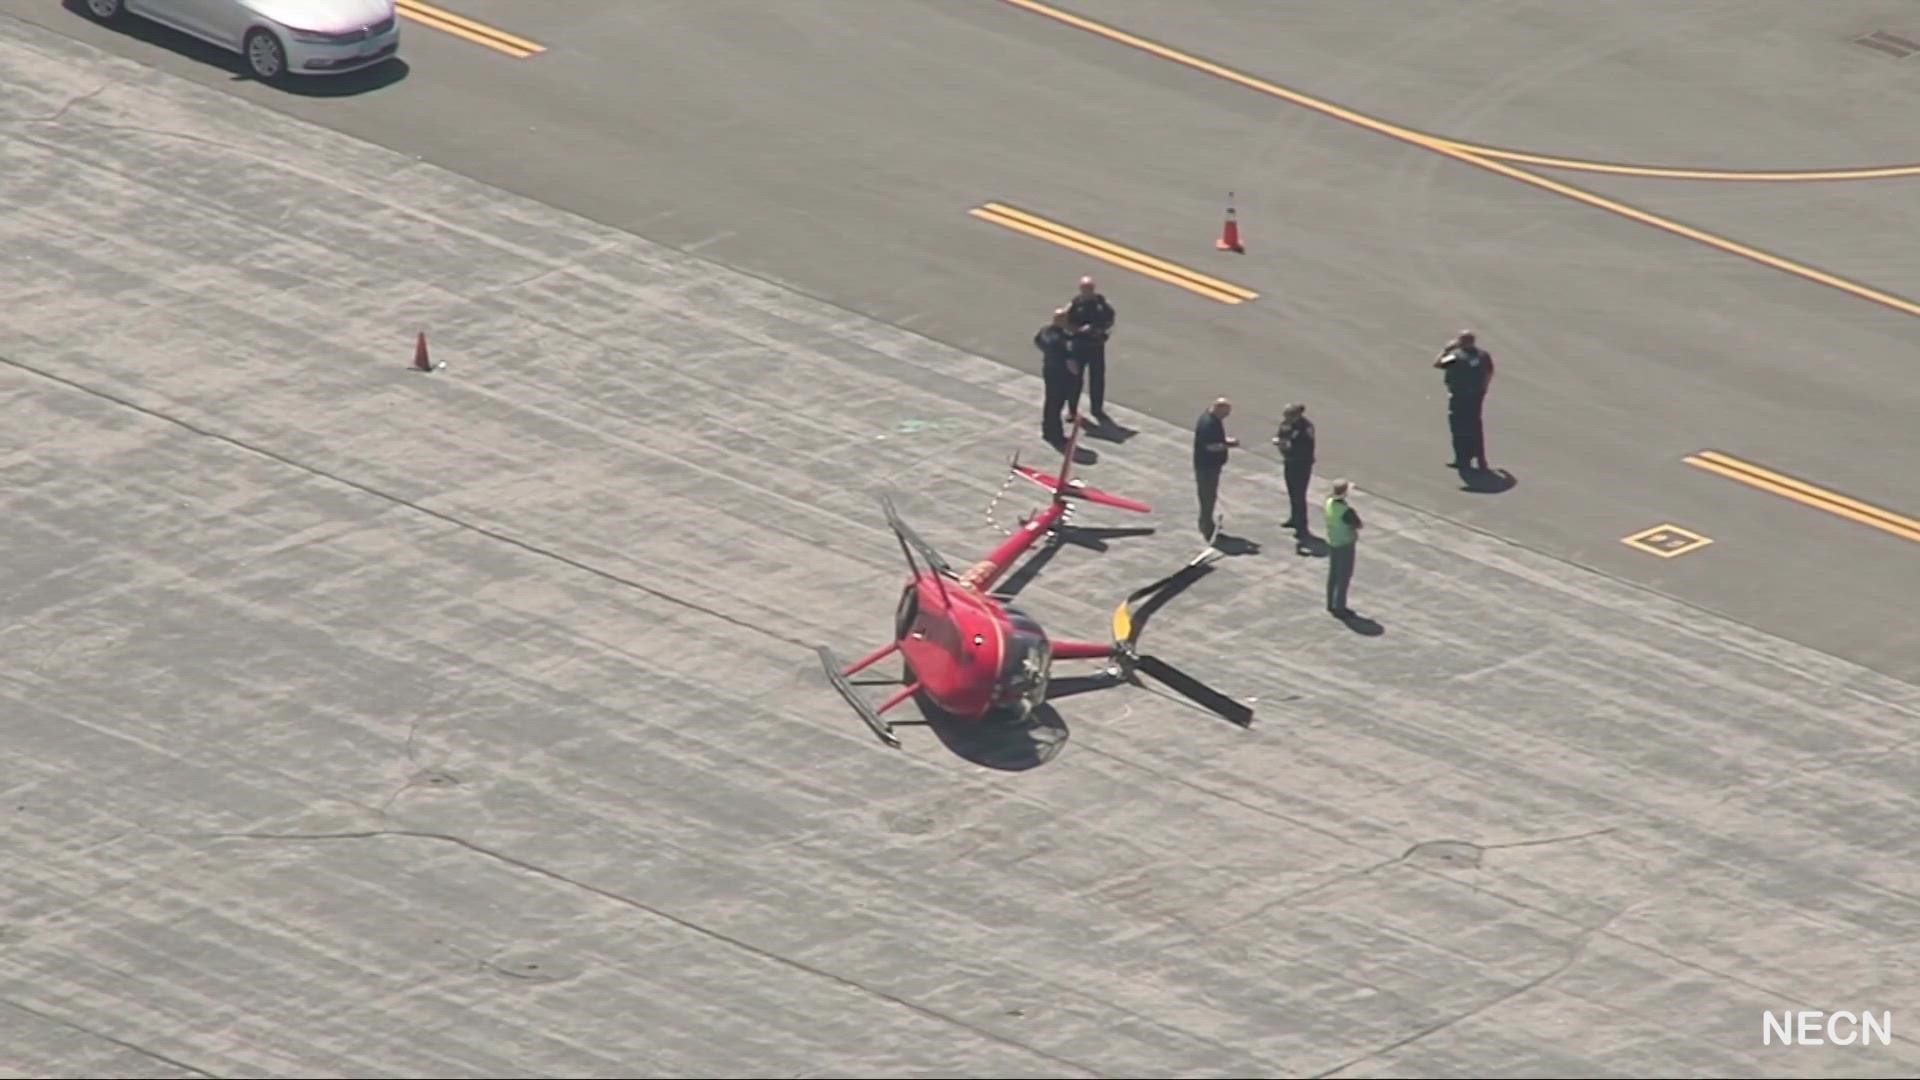 Images from the scene showed a red helicopter on its side.